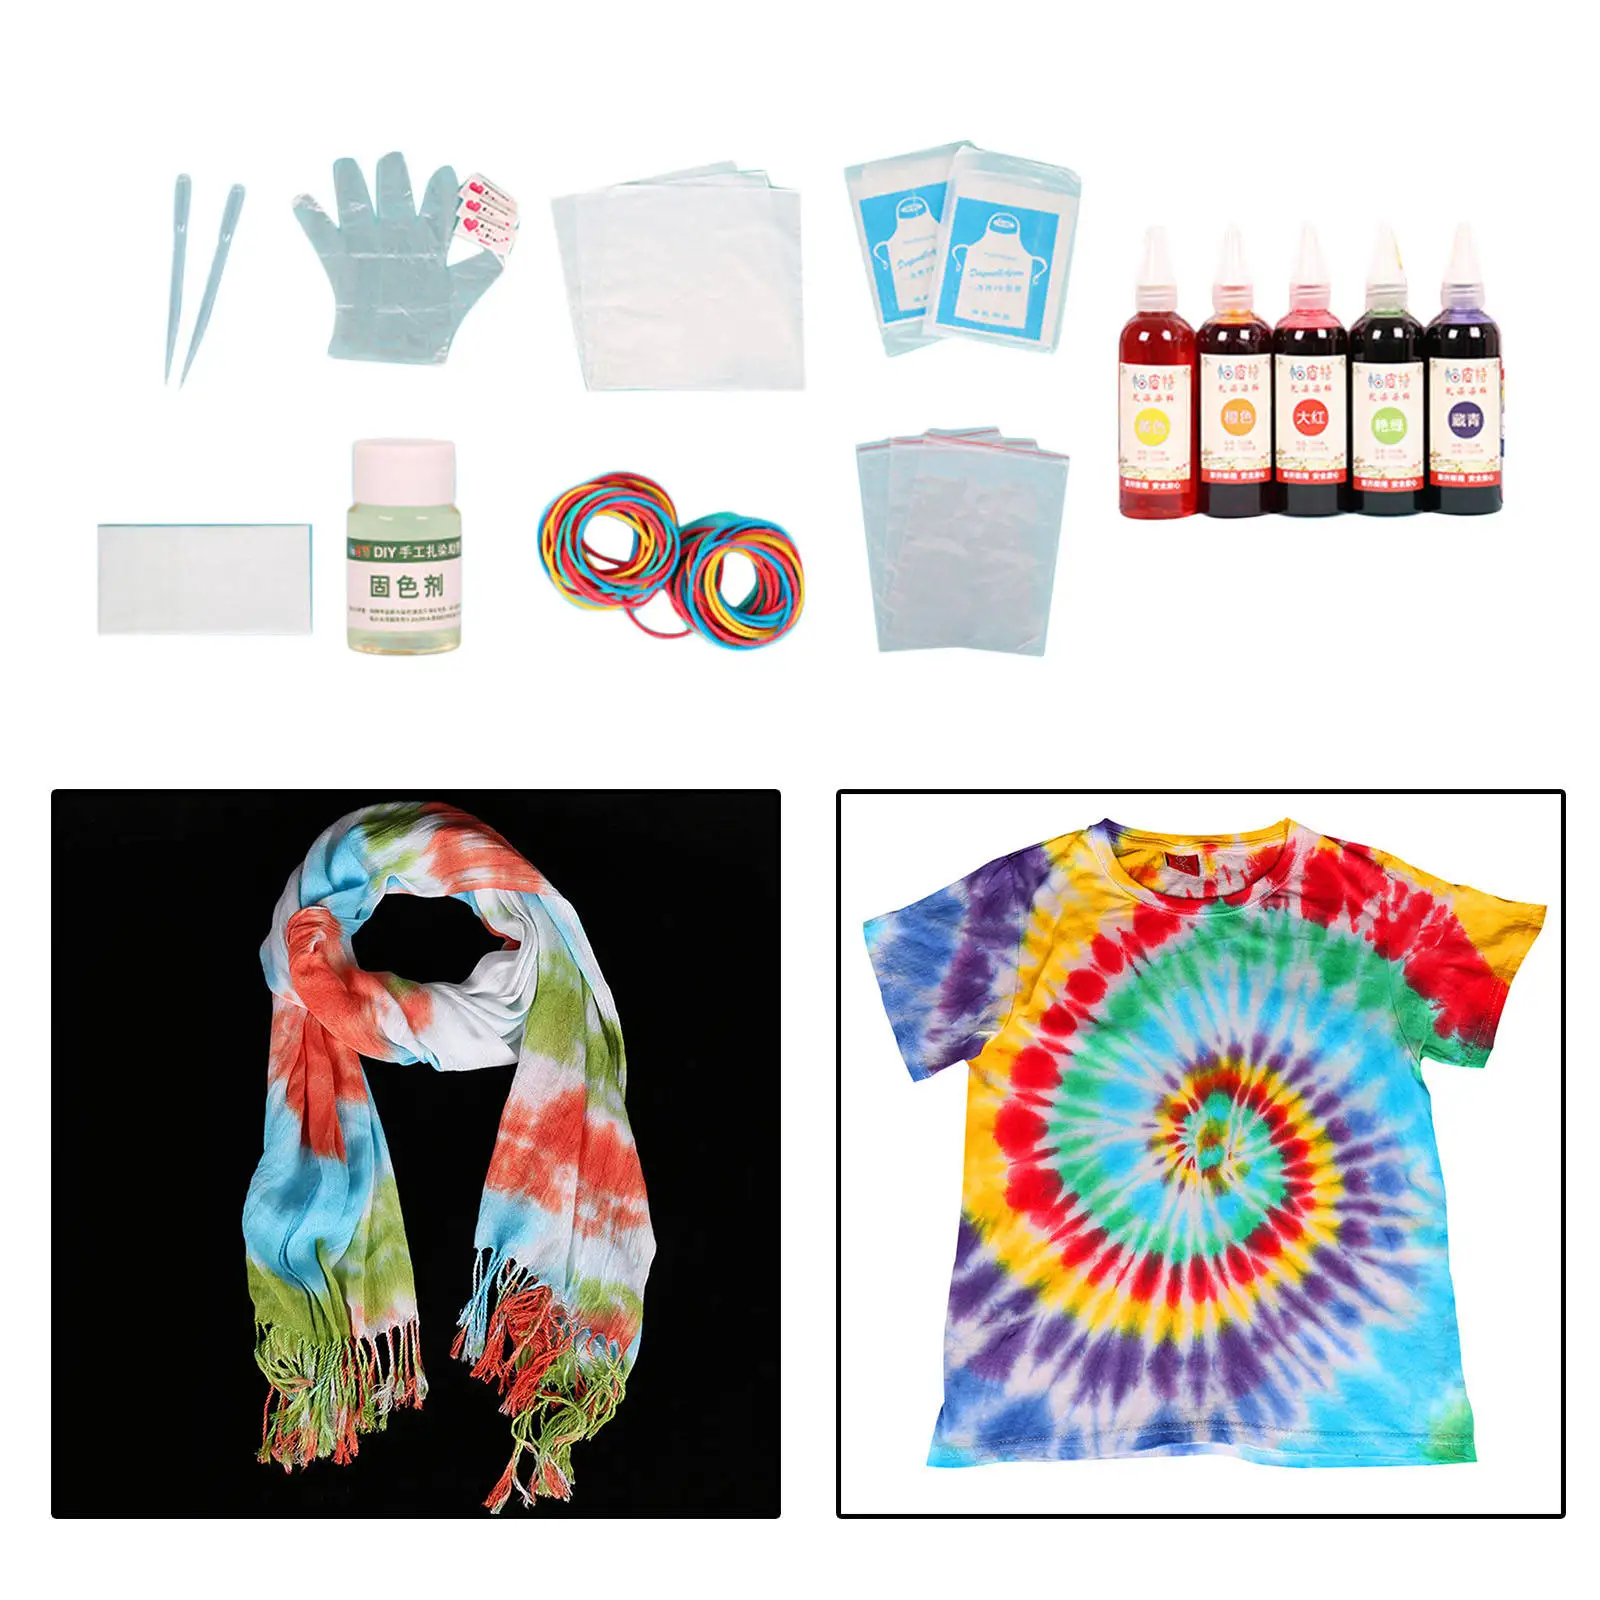 5 Colors Tie Dye Kit Dyeing DIY Art Craft Fabric Dye Set Permanent Paint for T-Shirts Accessories Kids Adults Party Supplies